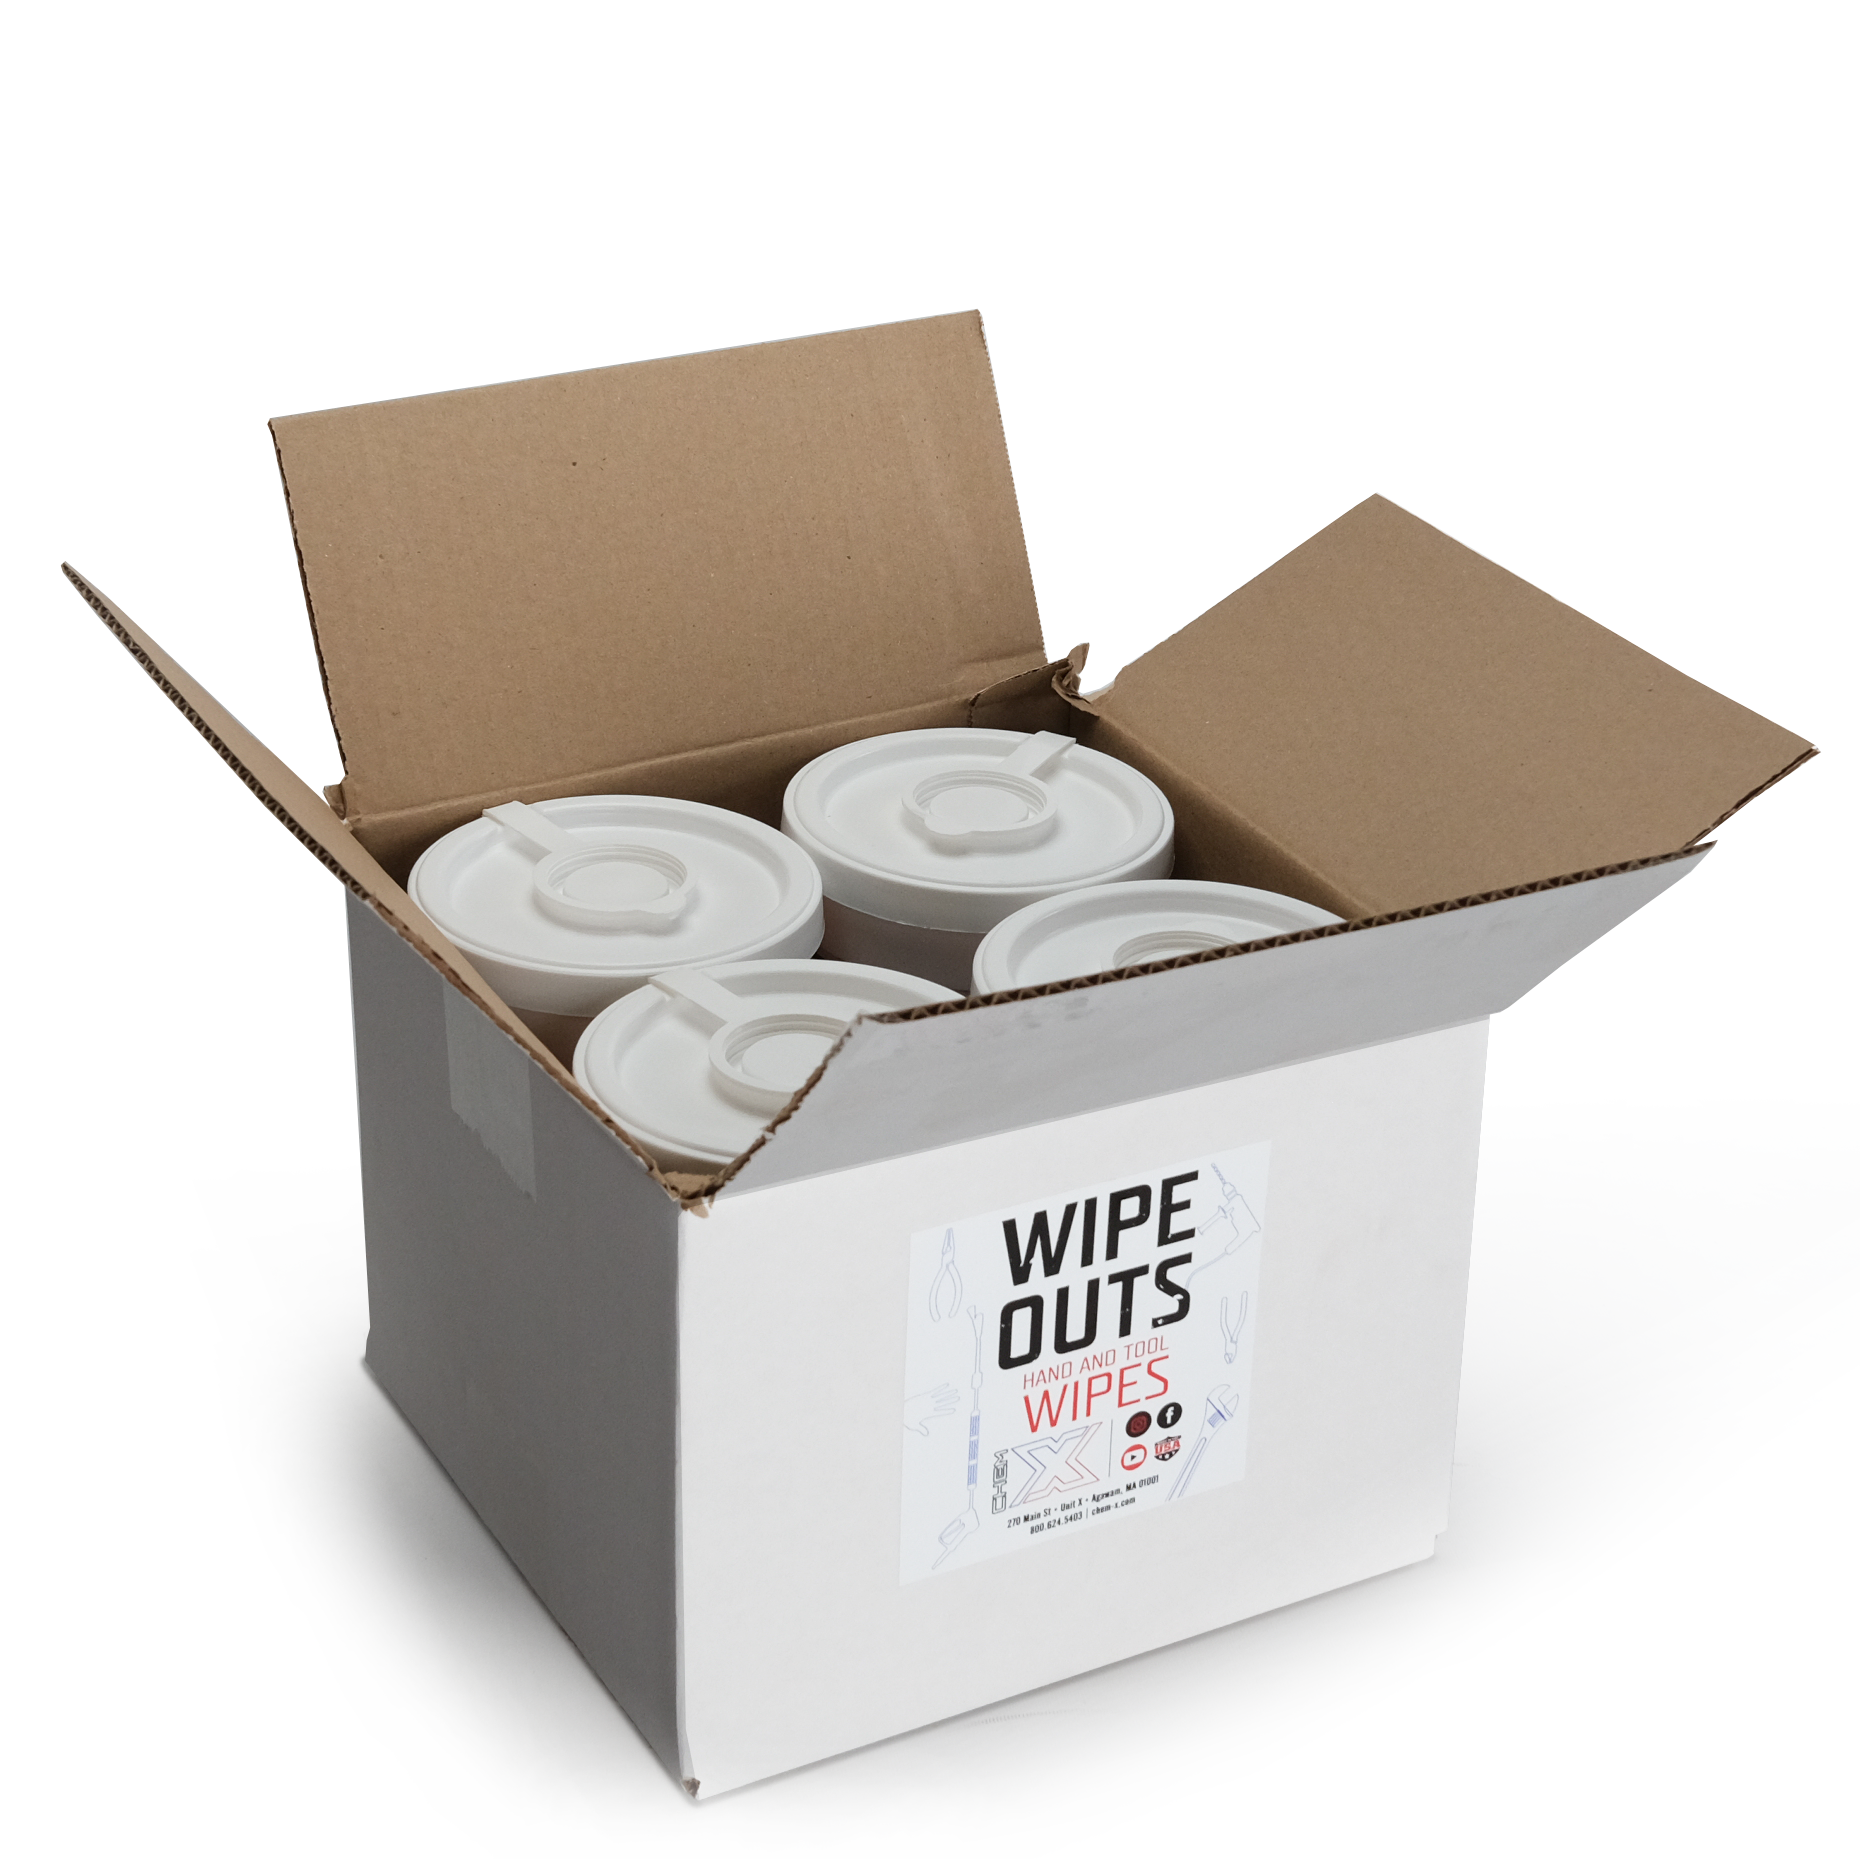 Wipe Outs: Hand + Tool Wipes - Chem-X